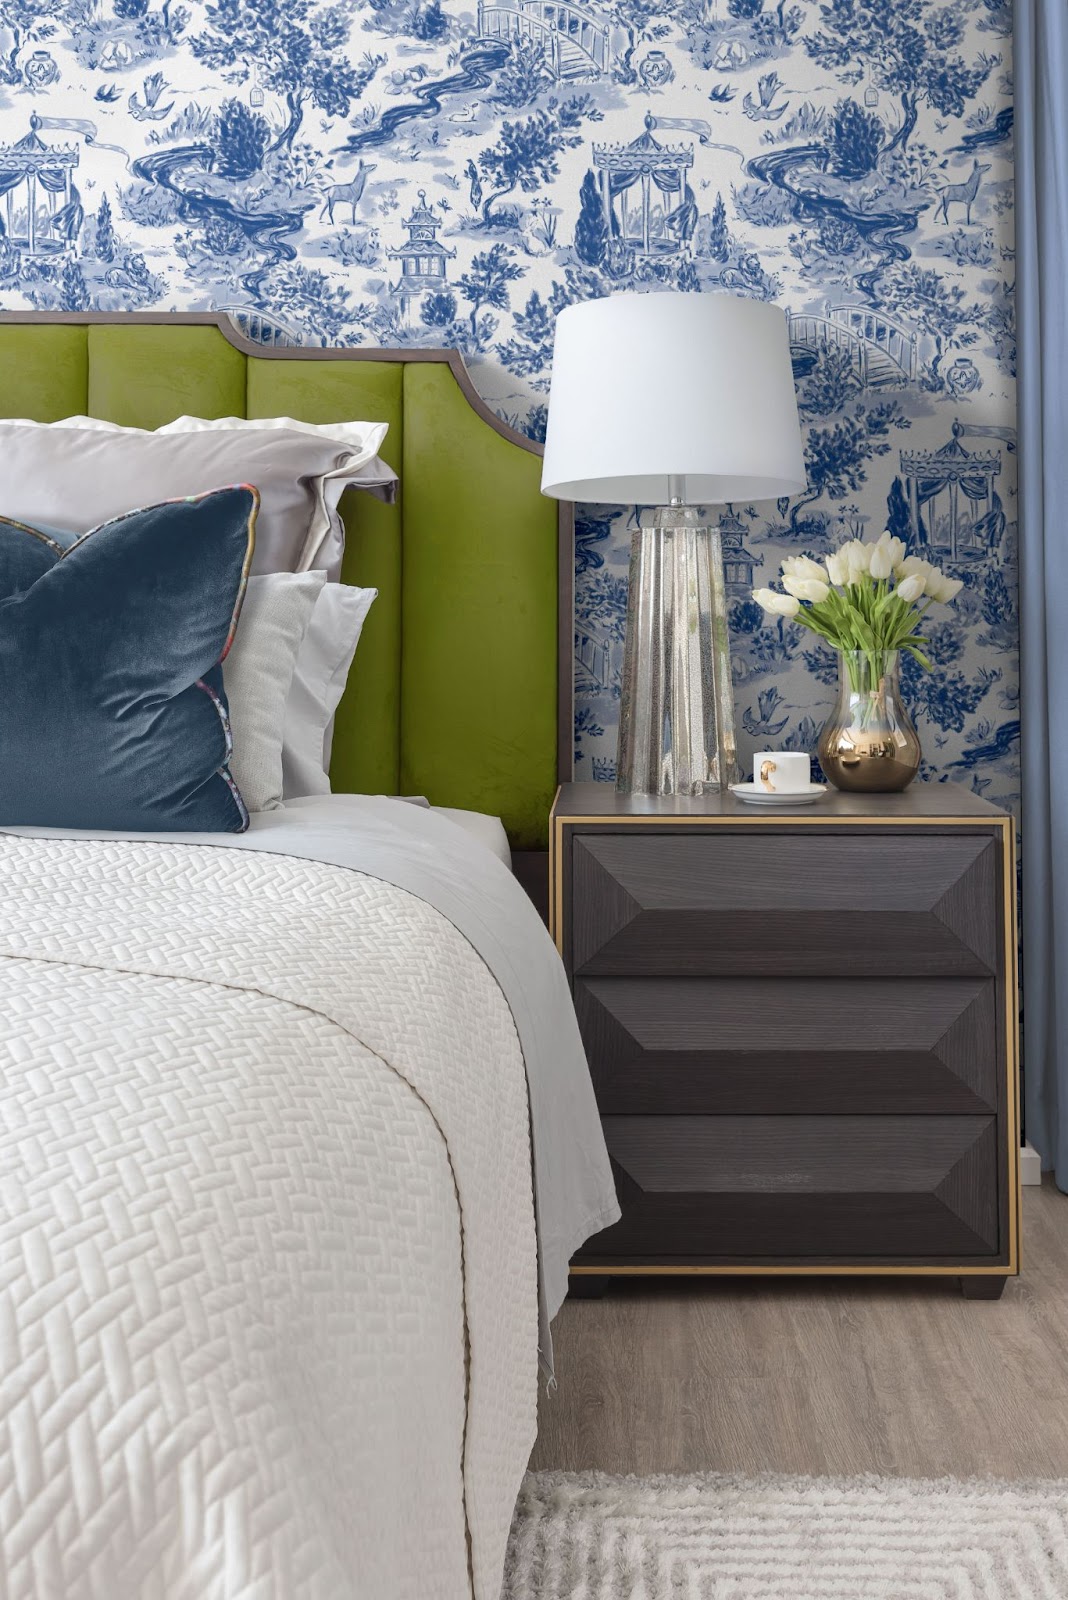 Blue and white is always right! The classic color pairing makes a fresh addition to almost any room, specifically in bedrooms. From light blue, to an inky indigo and deep navy, there’s a hue to suit every taste. Explore how to style a blue and white bedroom the SmithHönig way.